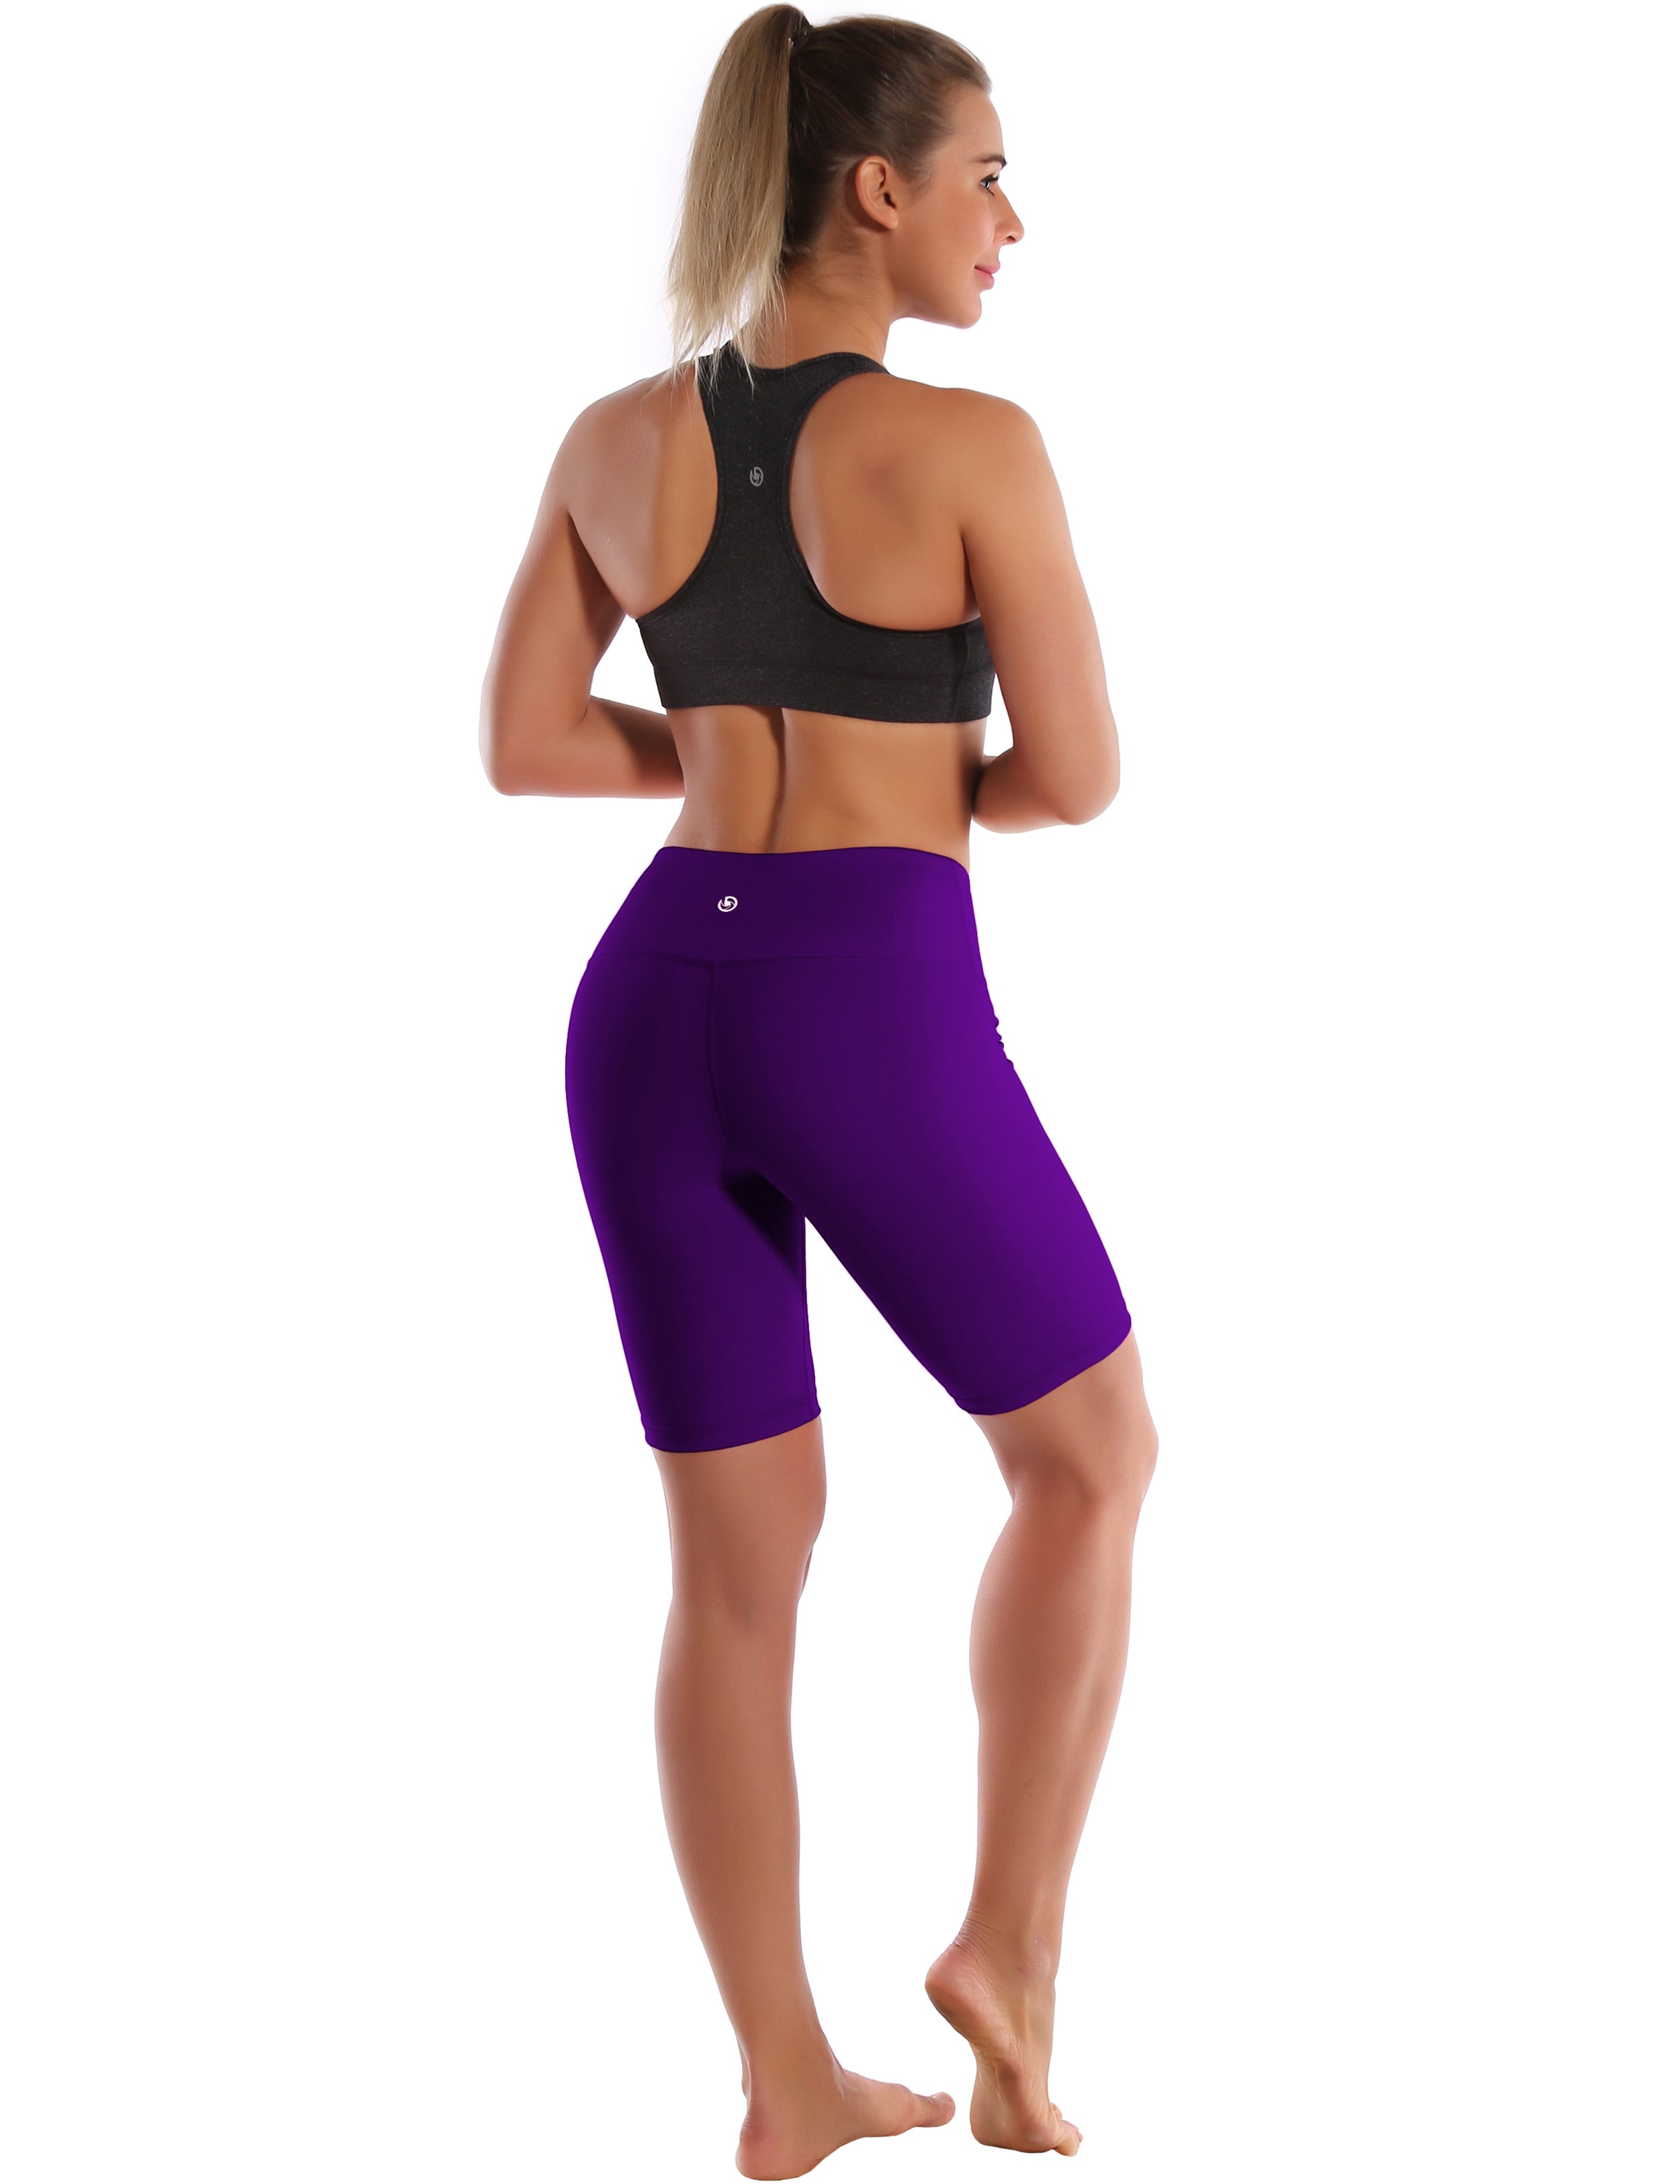 8" High Waist Plus Size Shorts eggplantpurple Sleek, soft, smooth and totally comfortable: our newest style is here. Softest-ever fabric High elasticity High density 4-way stretch Fabric doesn't attract lint easily No see-through Moisture-wicking Machine wash 75% Nylon, 25% Spandex